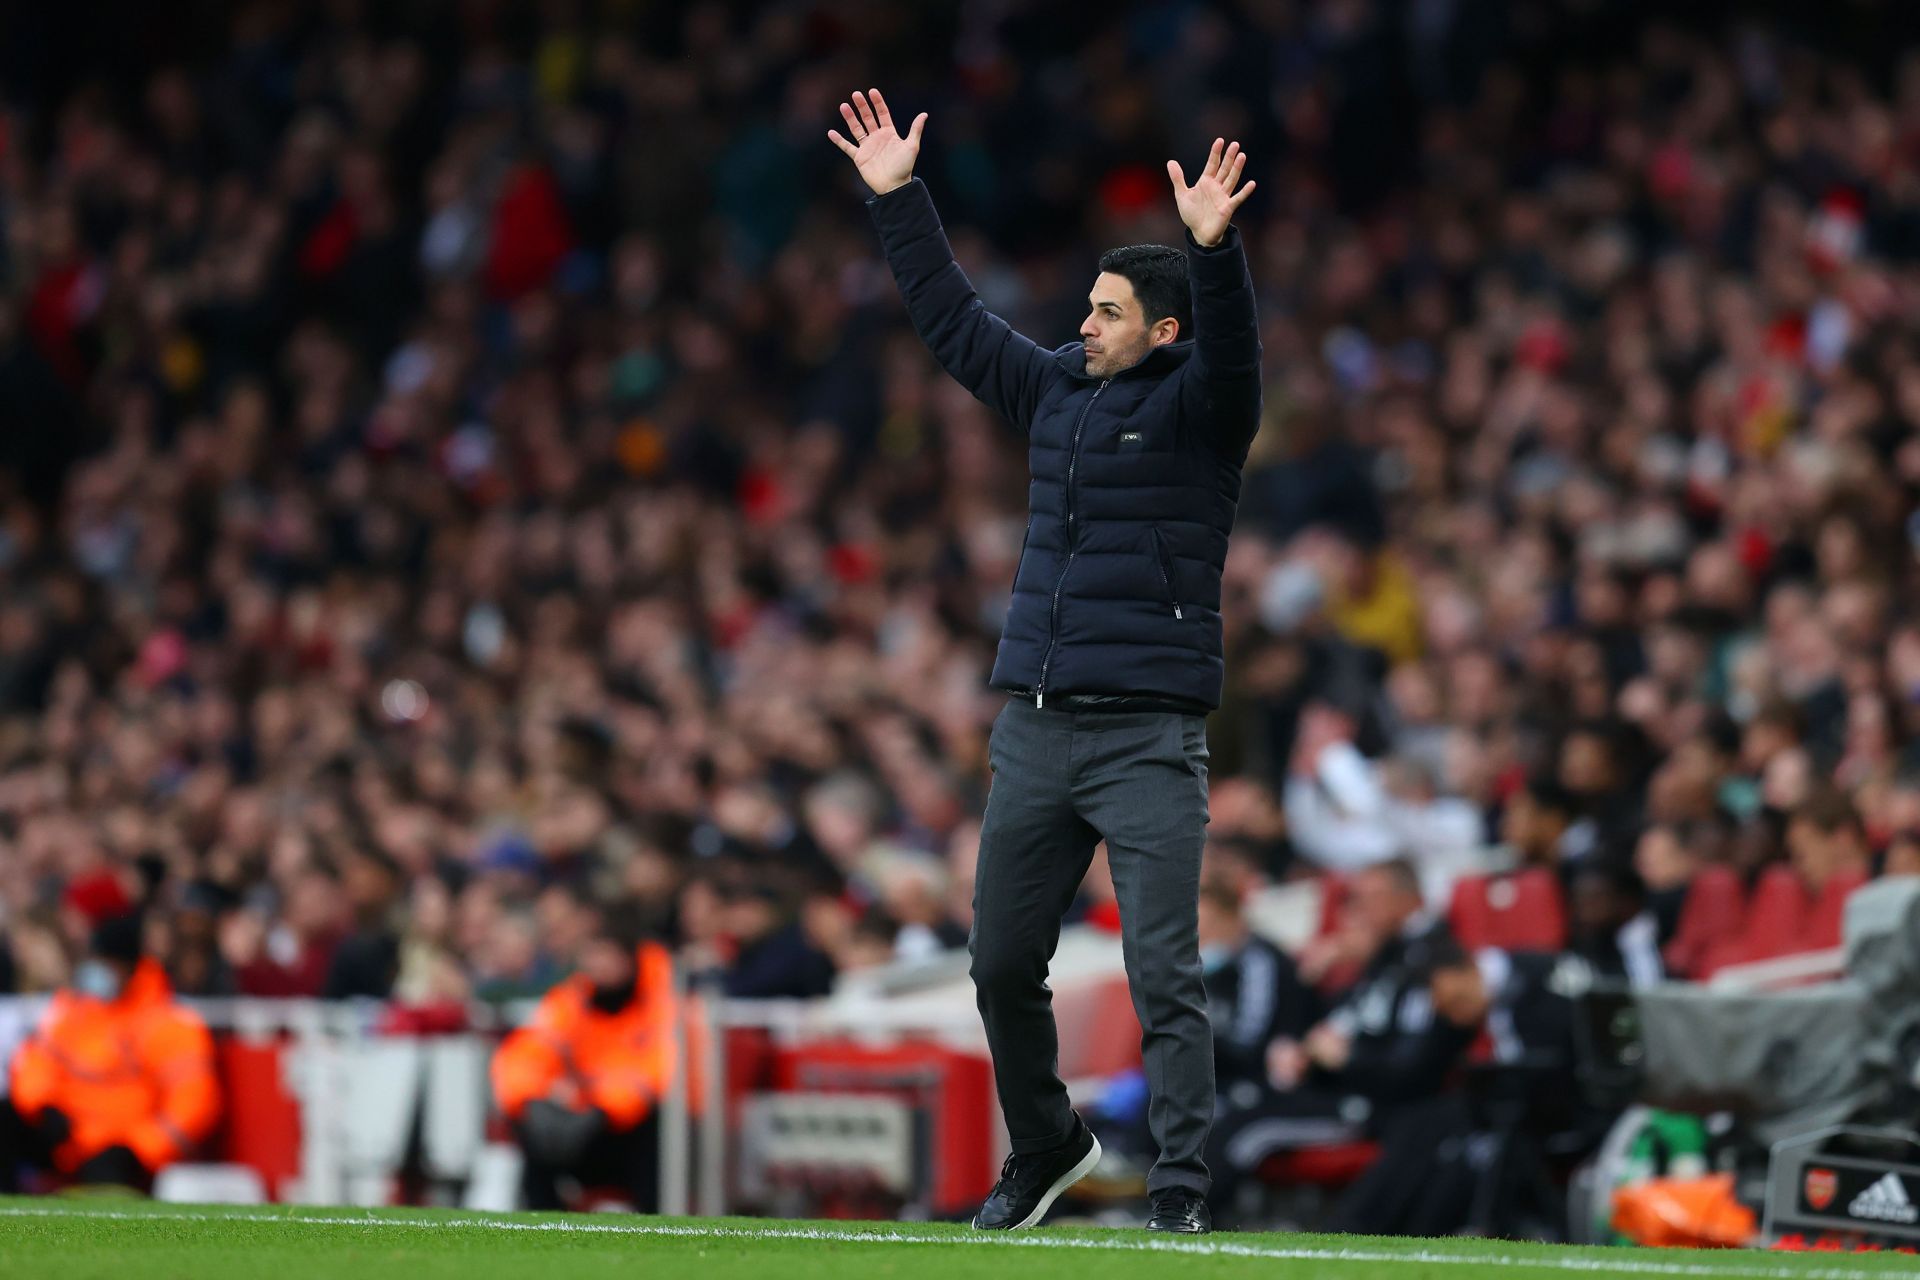 Arsenal manager Mikel Arteta has taken his team to fourth place in the Premier League.